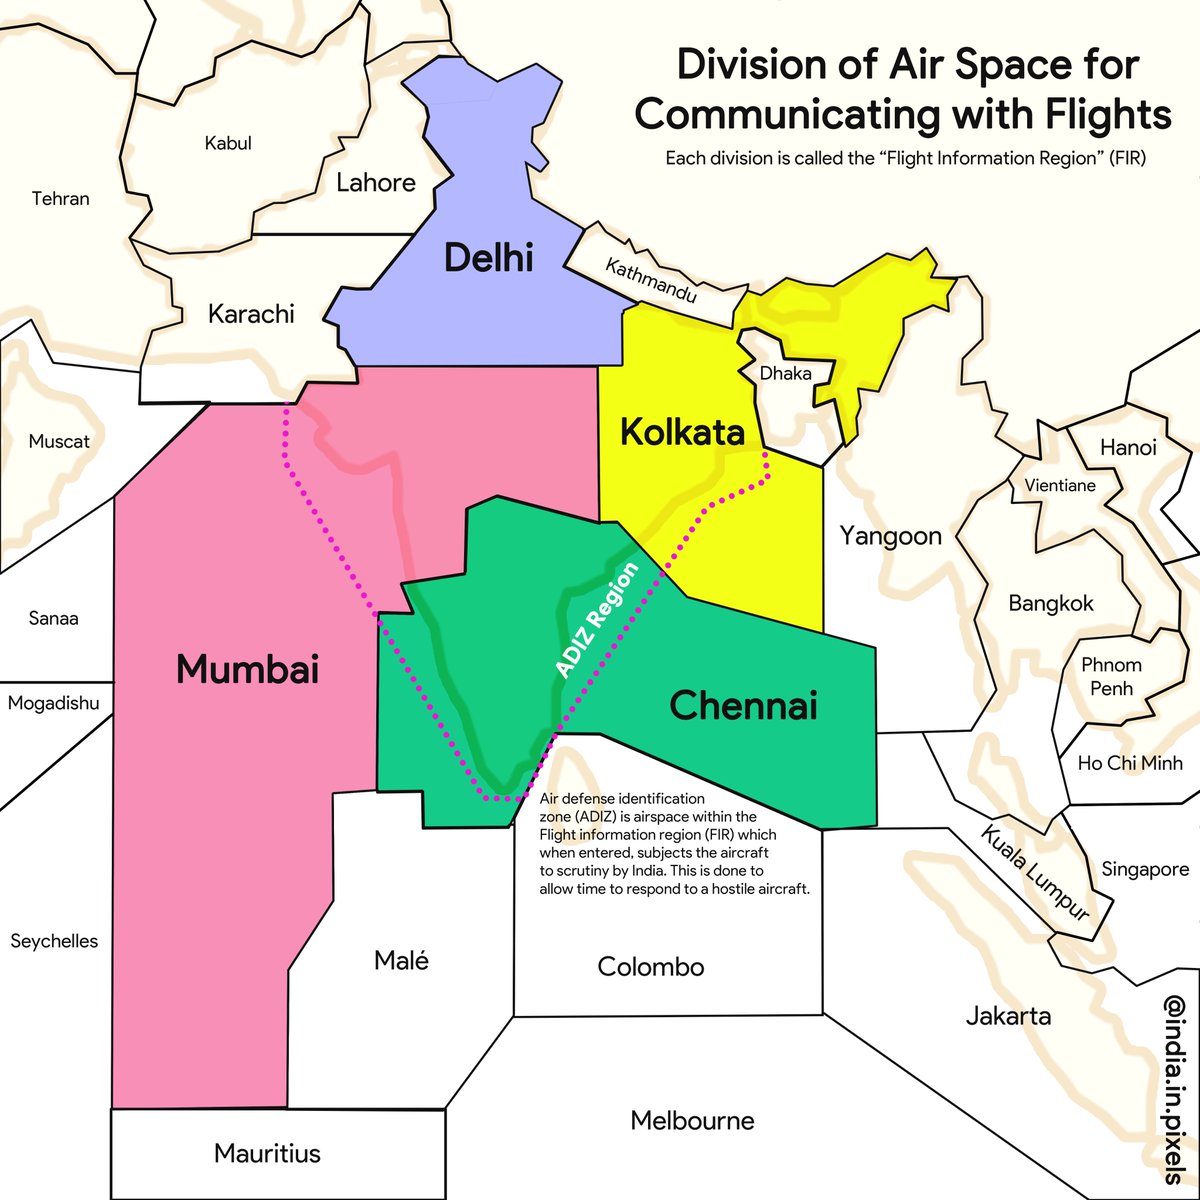 India In Pixels There Is Another Division Called Adiz Air Defence Identification Zone That Is Enclosed Within An Fir And Is More Guarded By Security In An Adiz Region